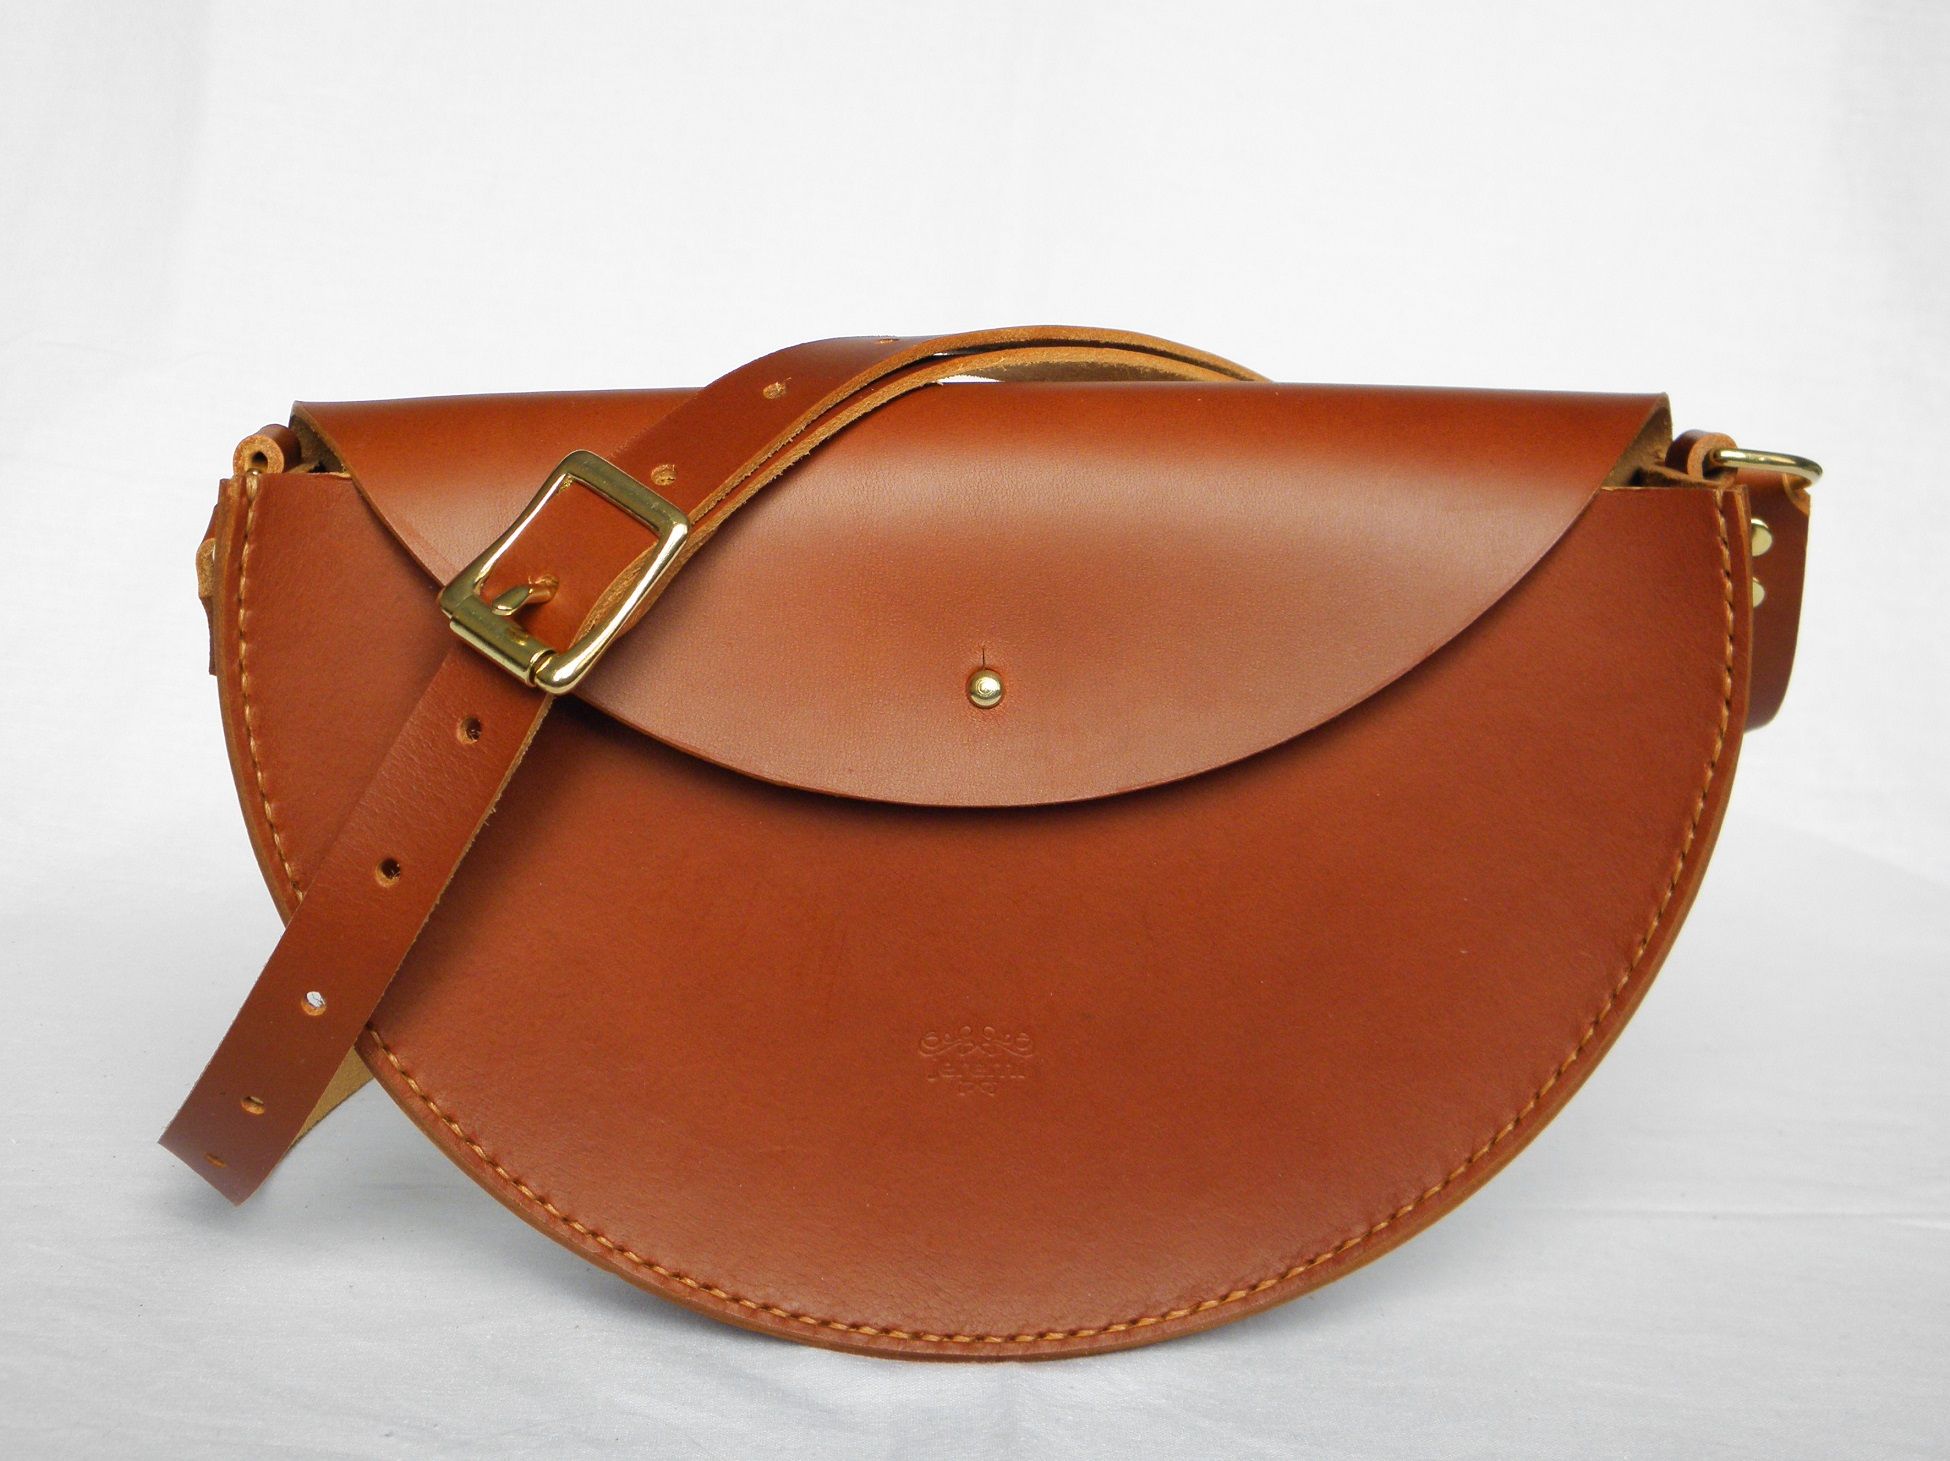 Hermès - Authenticated In-The-Loop Handbag - Leather Brown Plain for Women, Never Worn